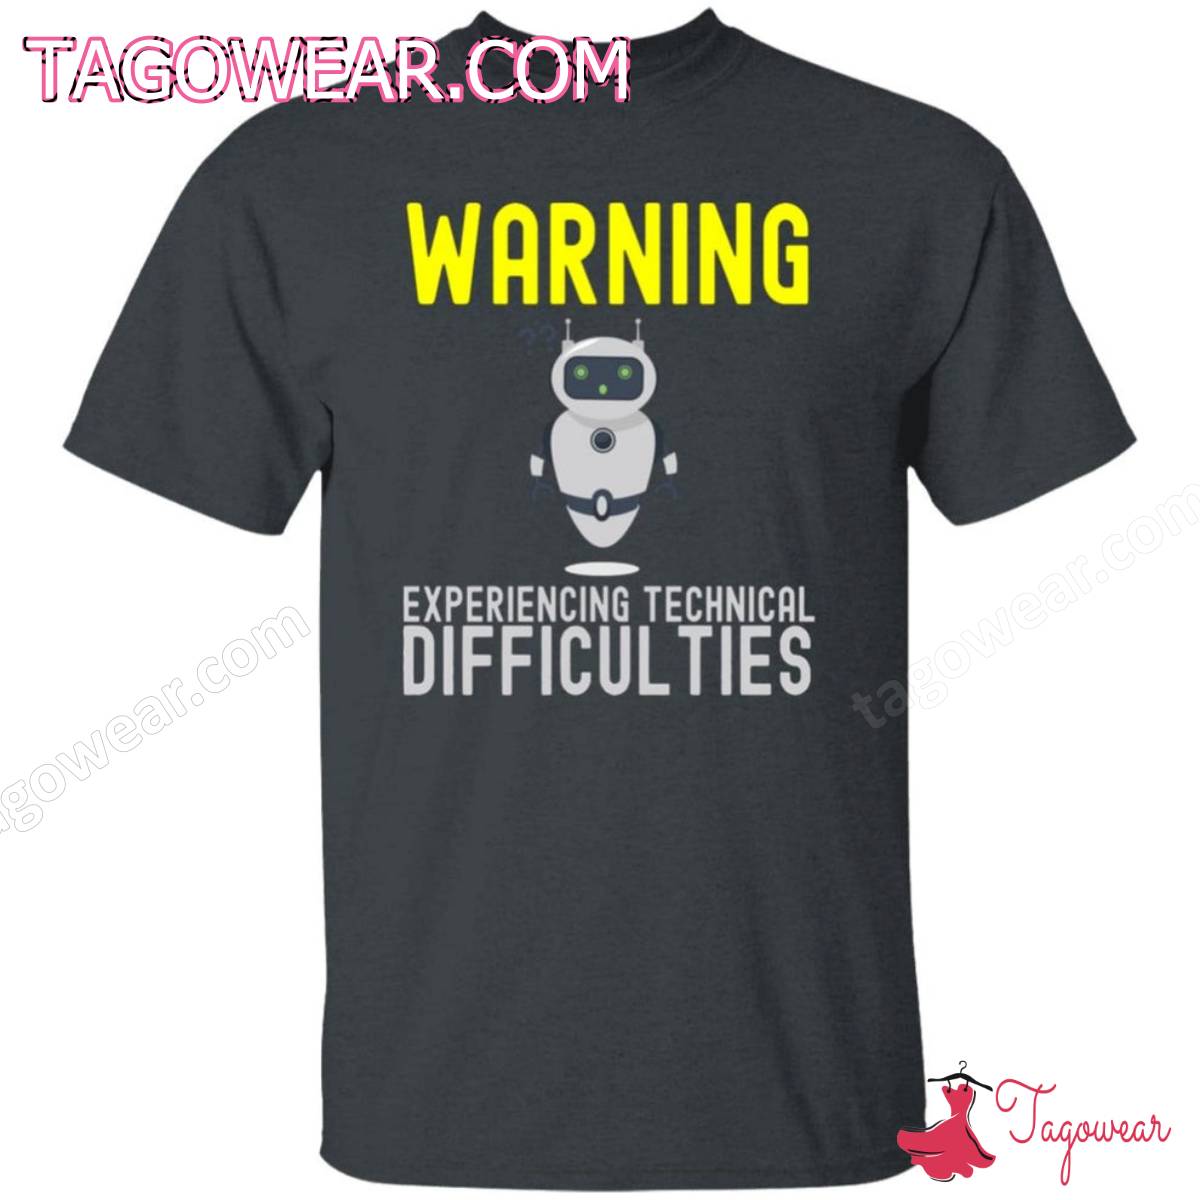 Robot Warning Experiencing Technical Difficulties Shirt a